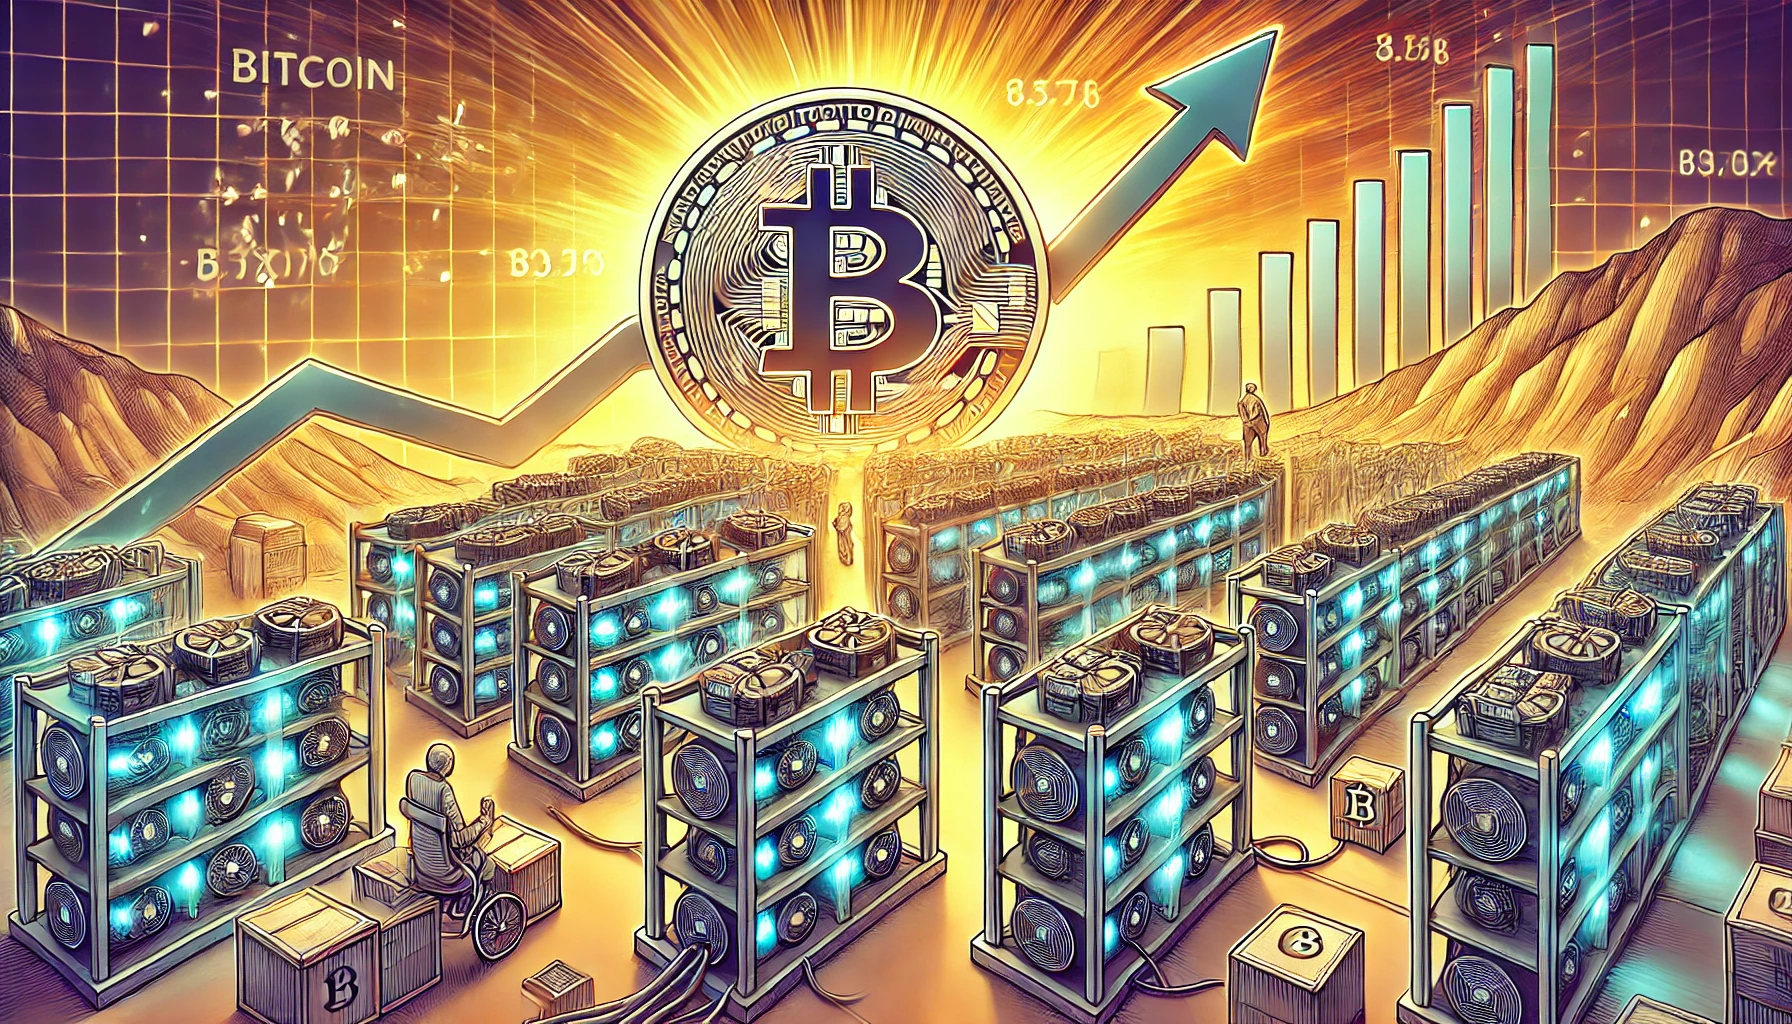 Bitcoin Hashrate Surges as Miners Ramp Up Operations